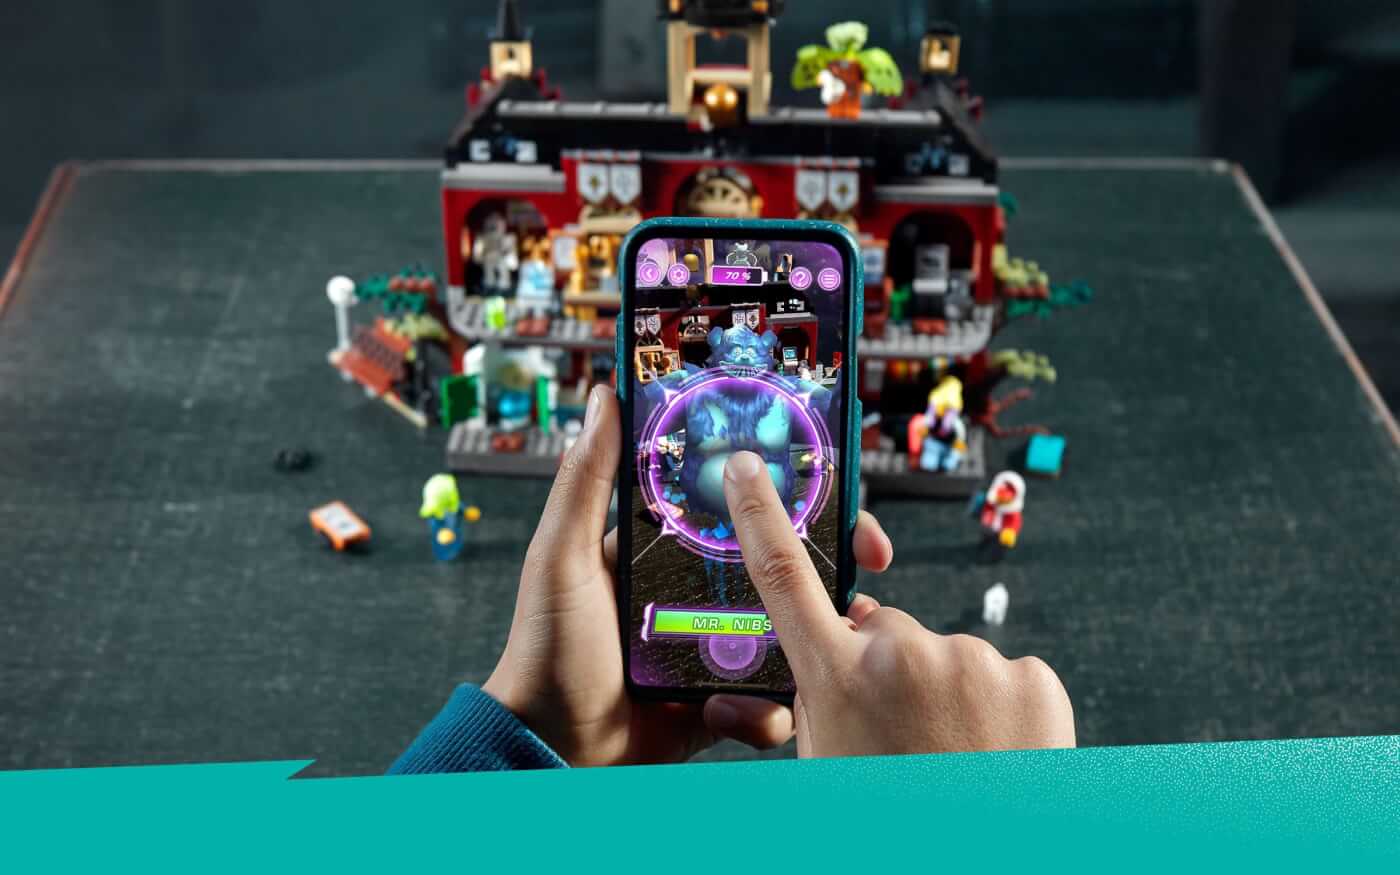 lego hidden side augmeted reality app